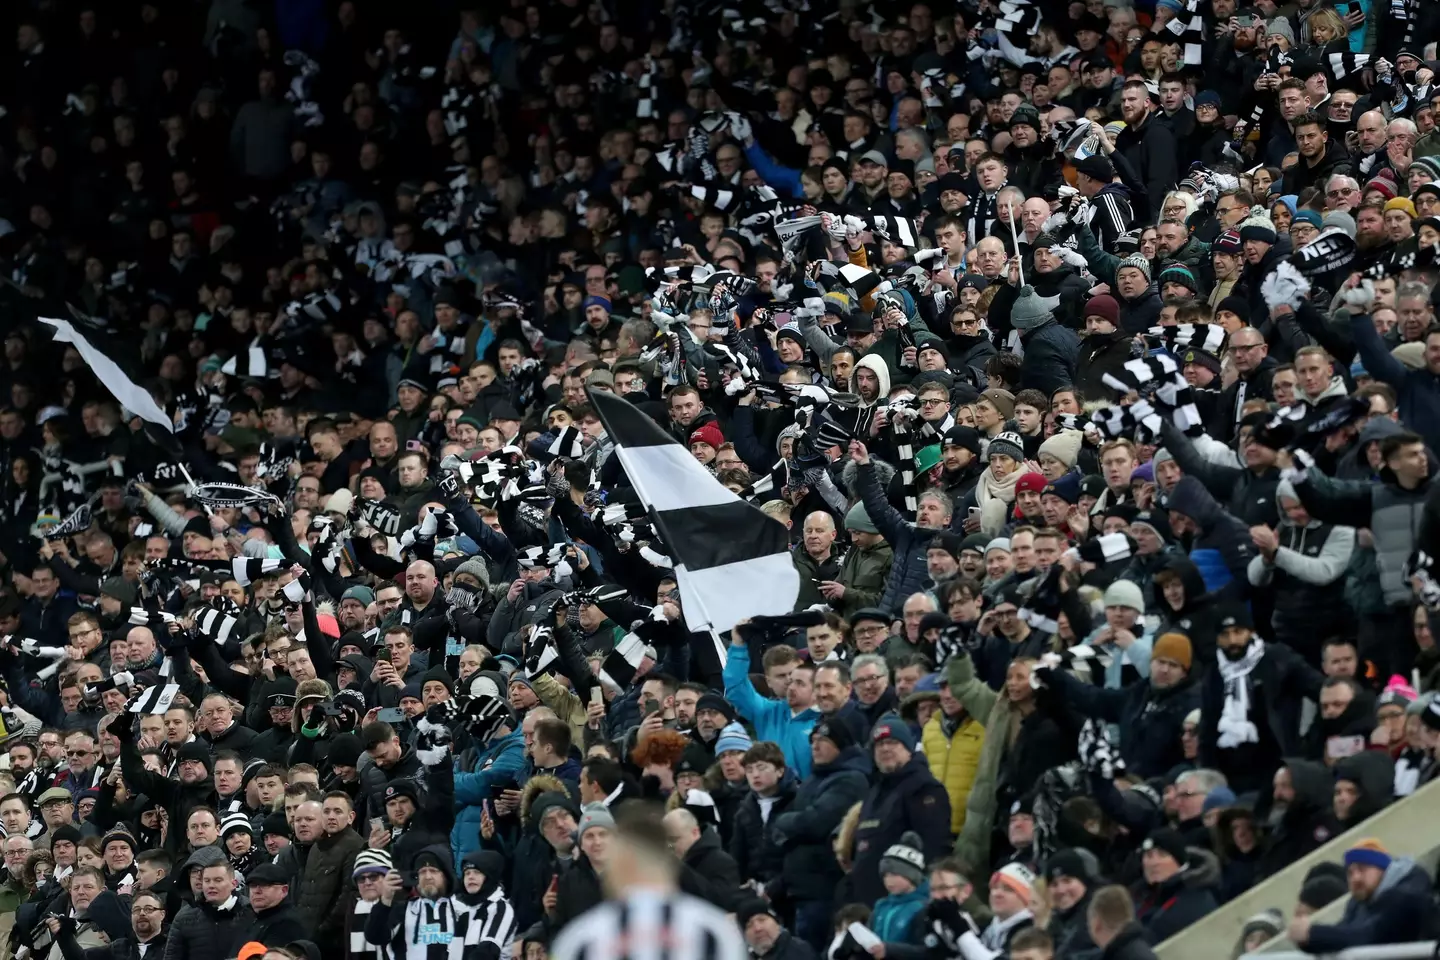 Newcastle United fans are expected to travel in great numbers down to Wembley on Sunday